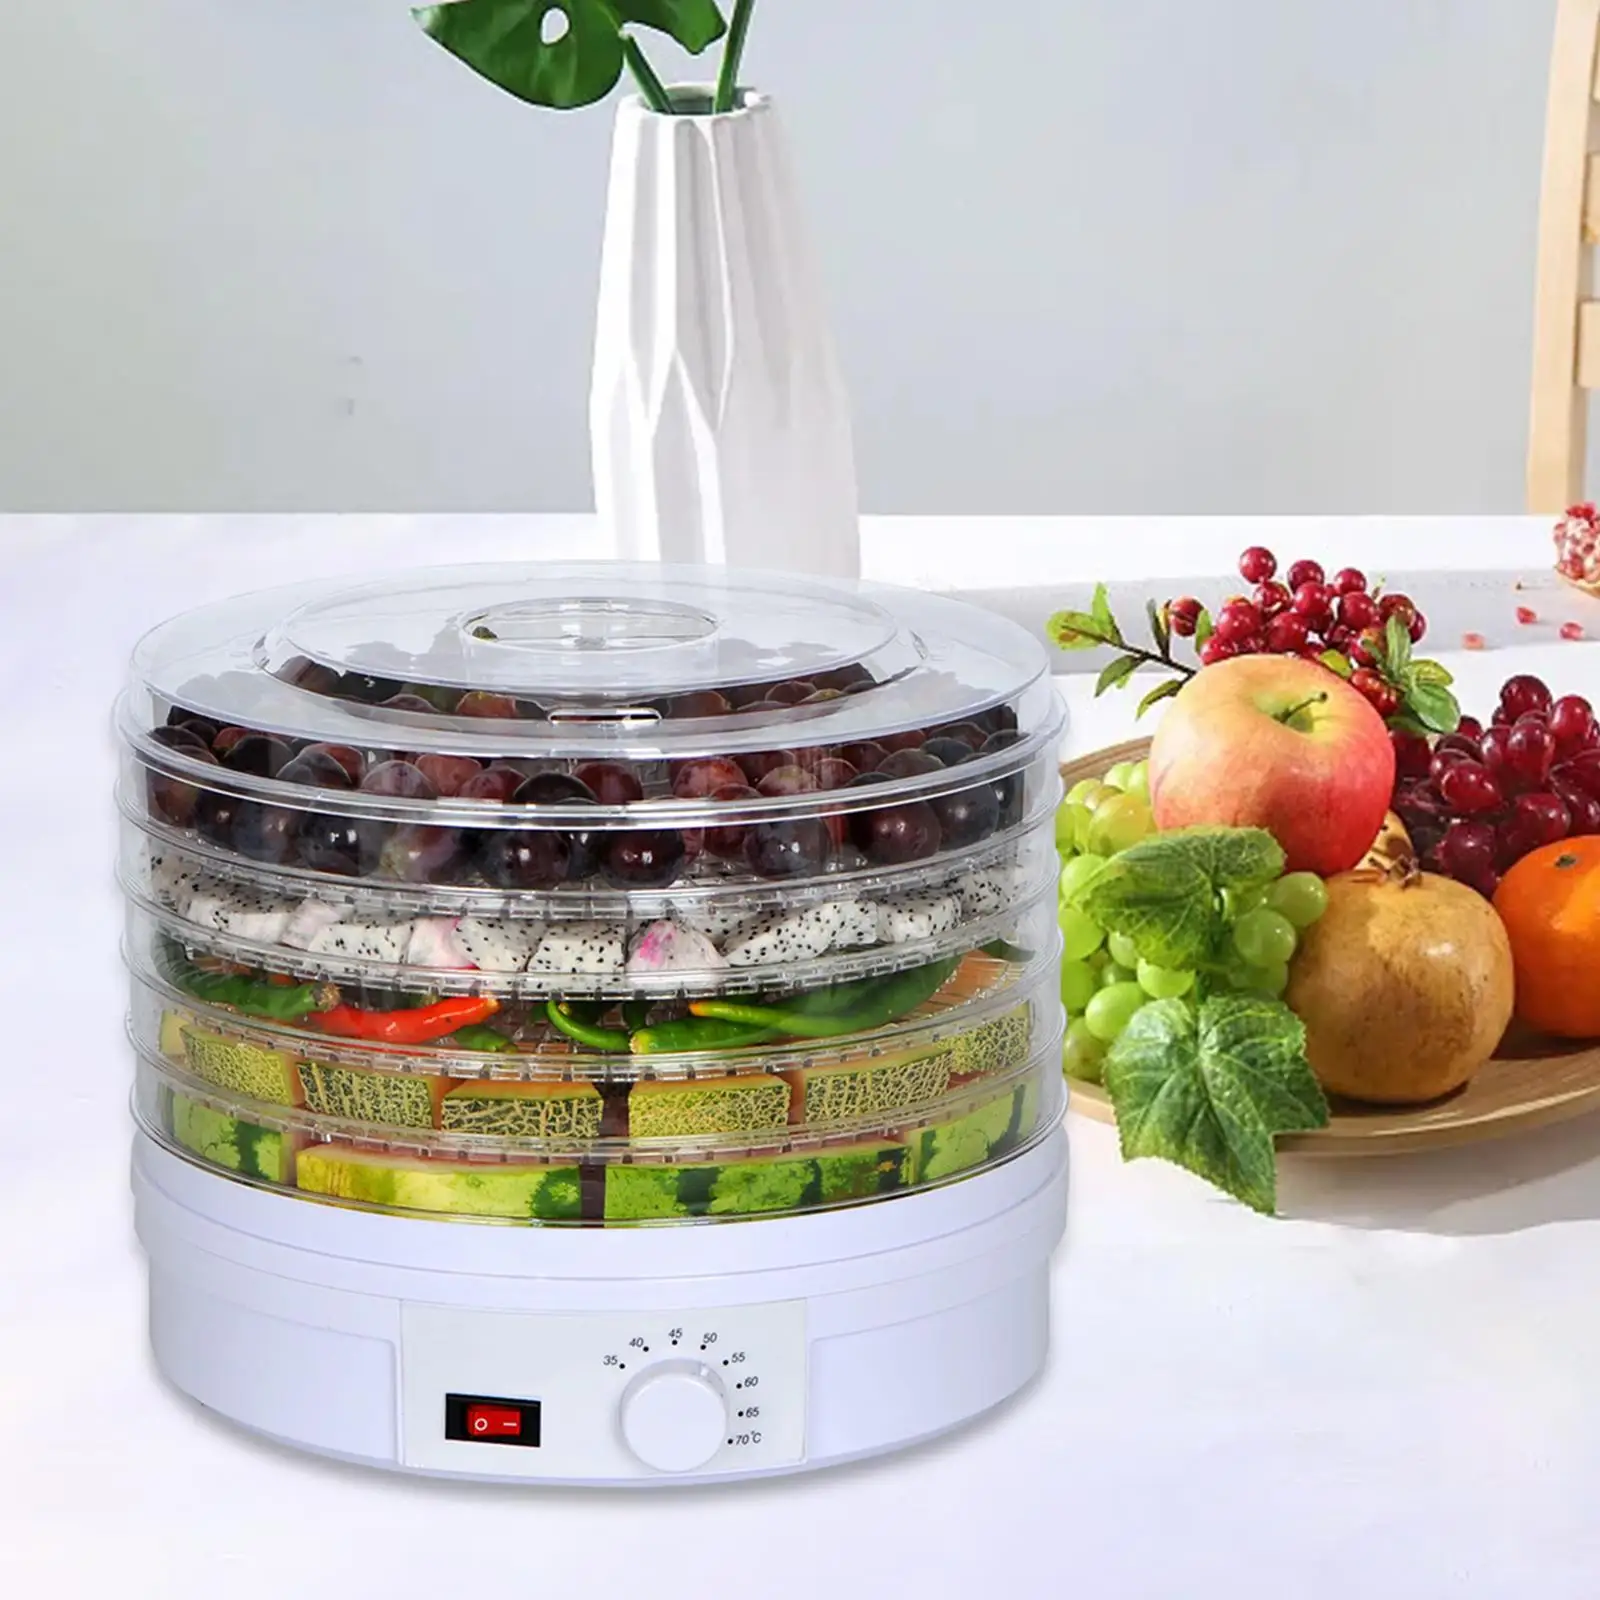 Fruit Dryer Stackable Portable Reusable Save Electricity Temperature Control Mute 5 Layers for Vegetable Kitchens Pet Food Meats